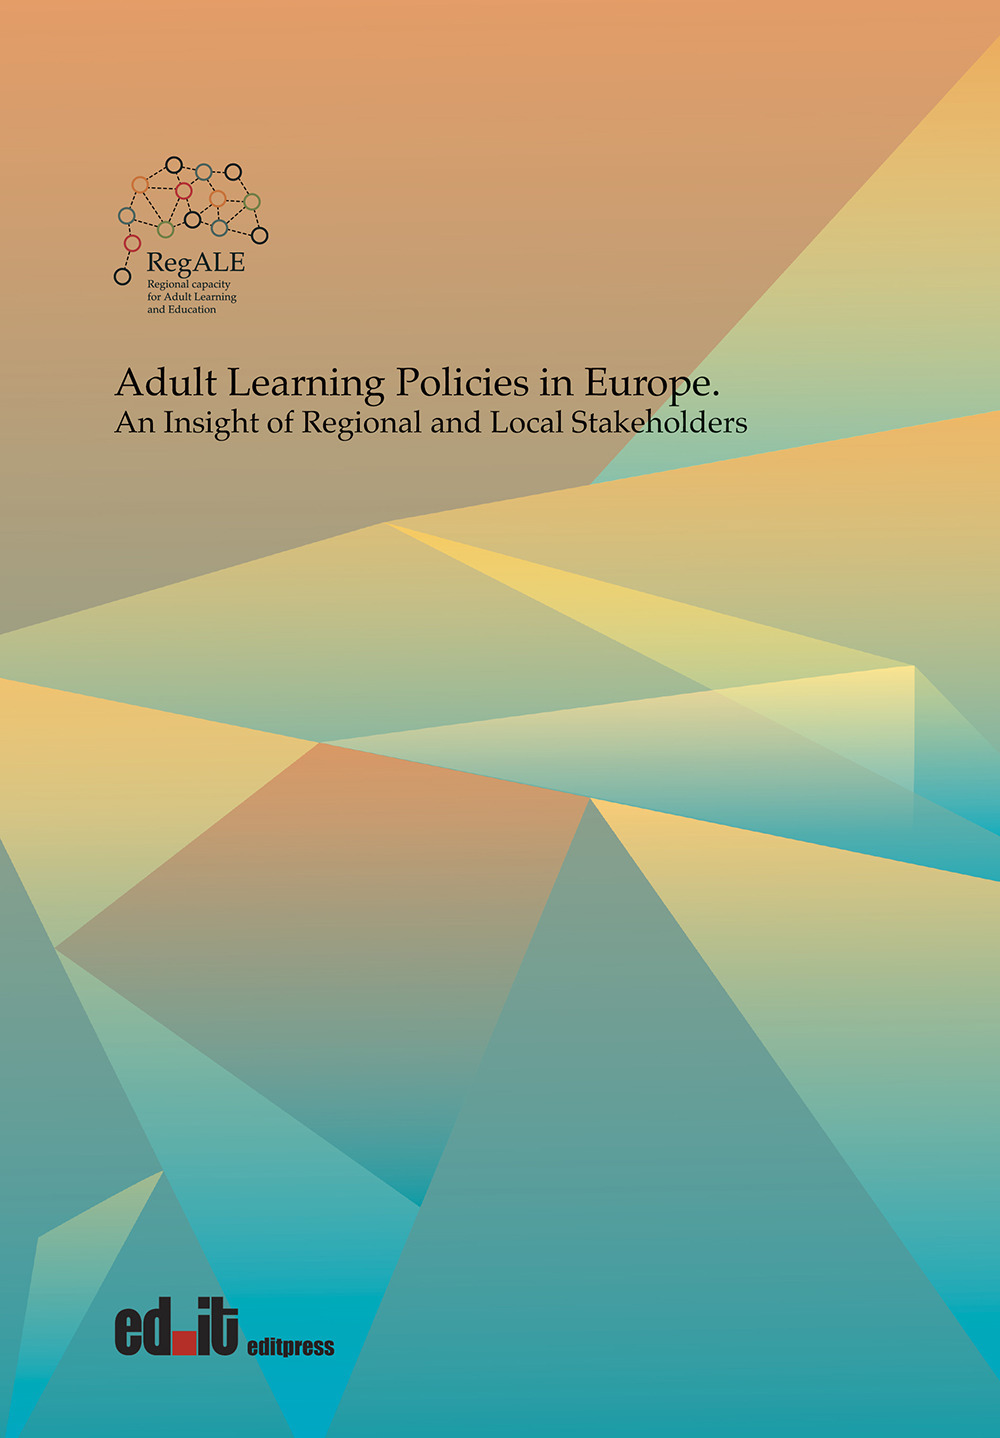 Adult learning policies in Europe. An insight of regional and local stakeholders